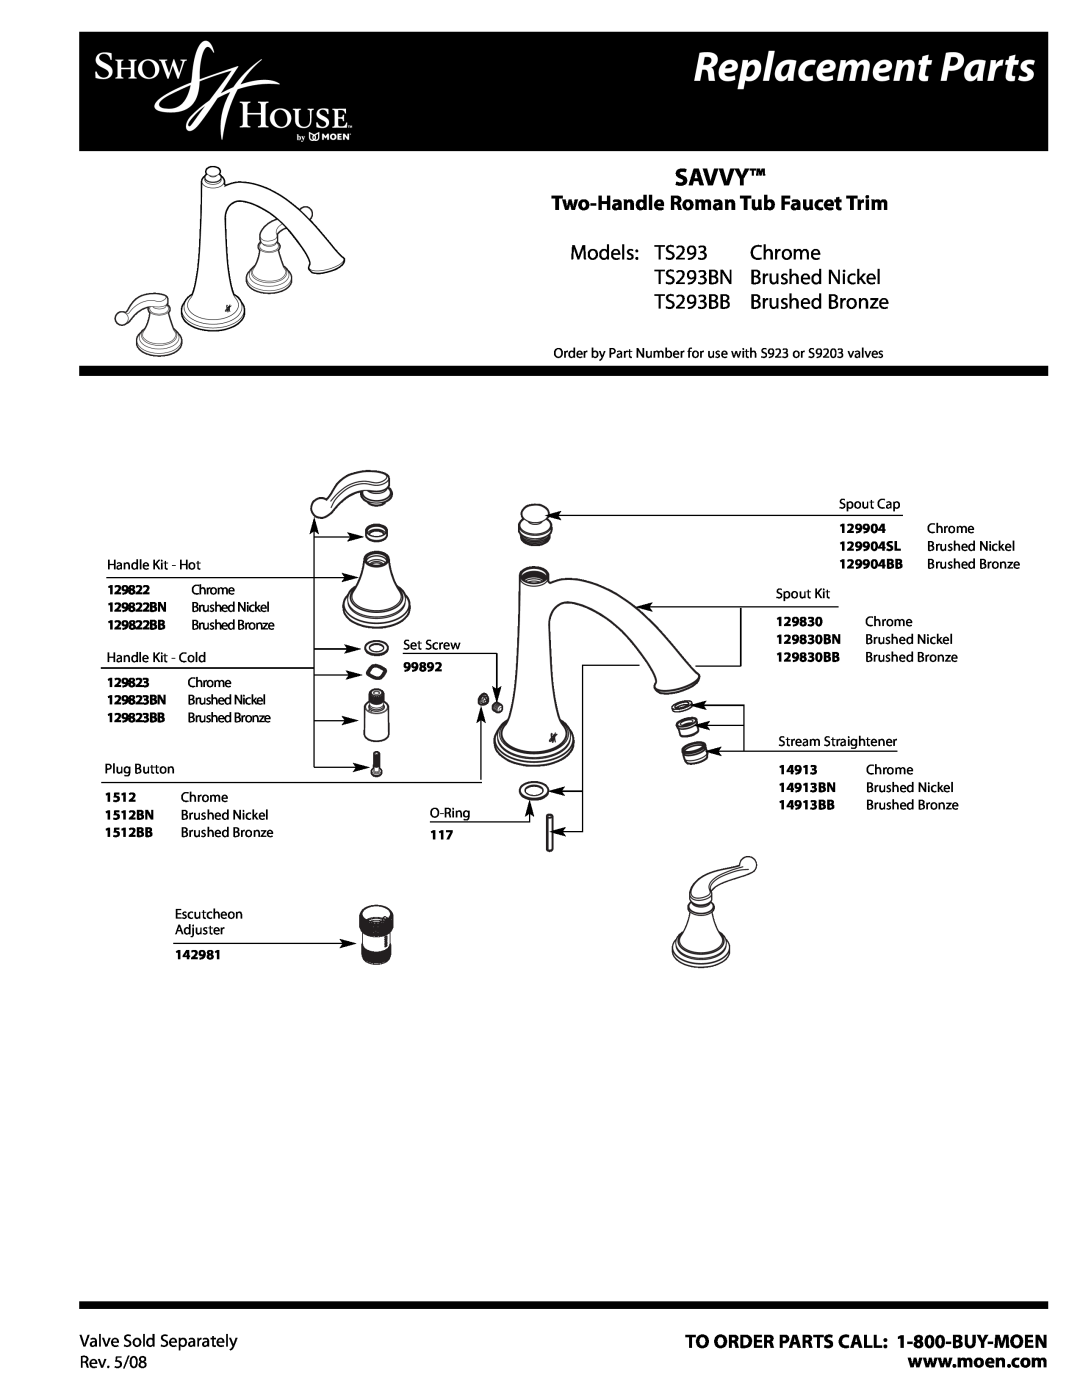 Moen TS293BN manual Replacement Parts, Savvy, Two-Handle Roman Tub Faucet Trim, Models TS293, Chrome, Brushed Nickel 